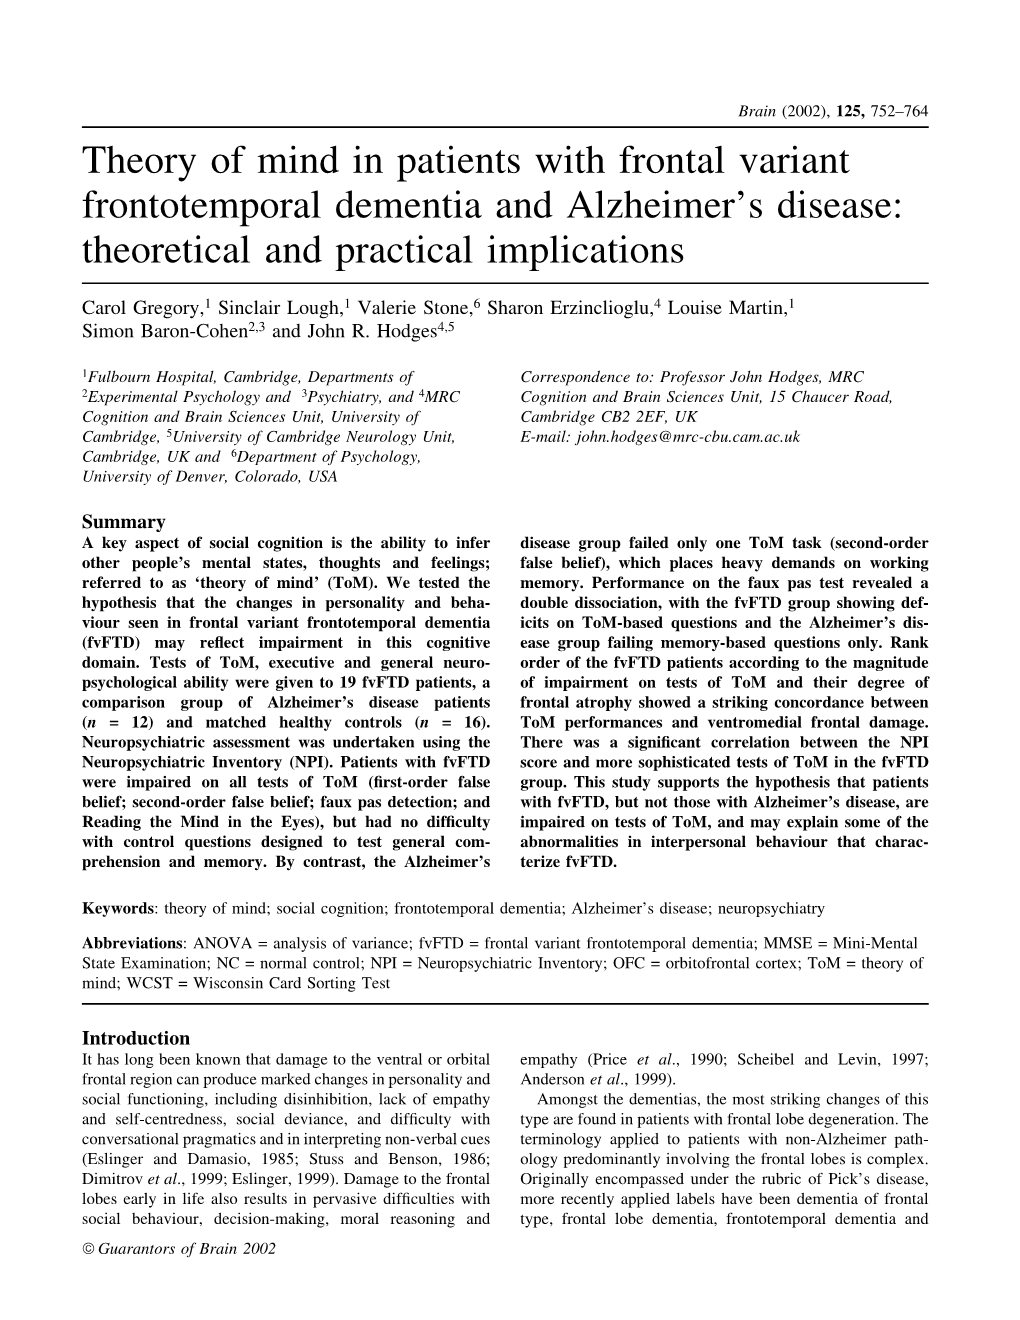 Theory of Mind in Patients with Frontal Variant Frontotemporal Dementia and Alzheimer's Disease: Theoretical and Practical Implications